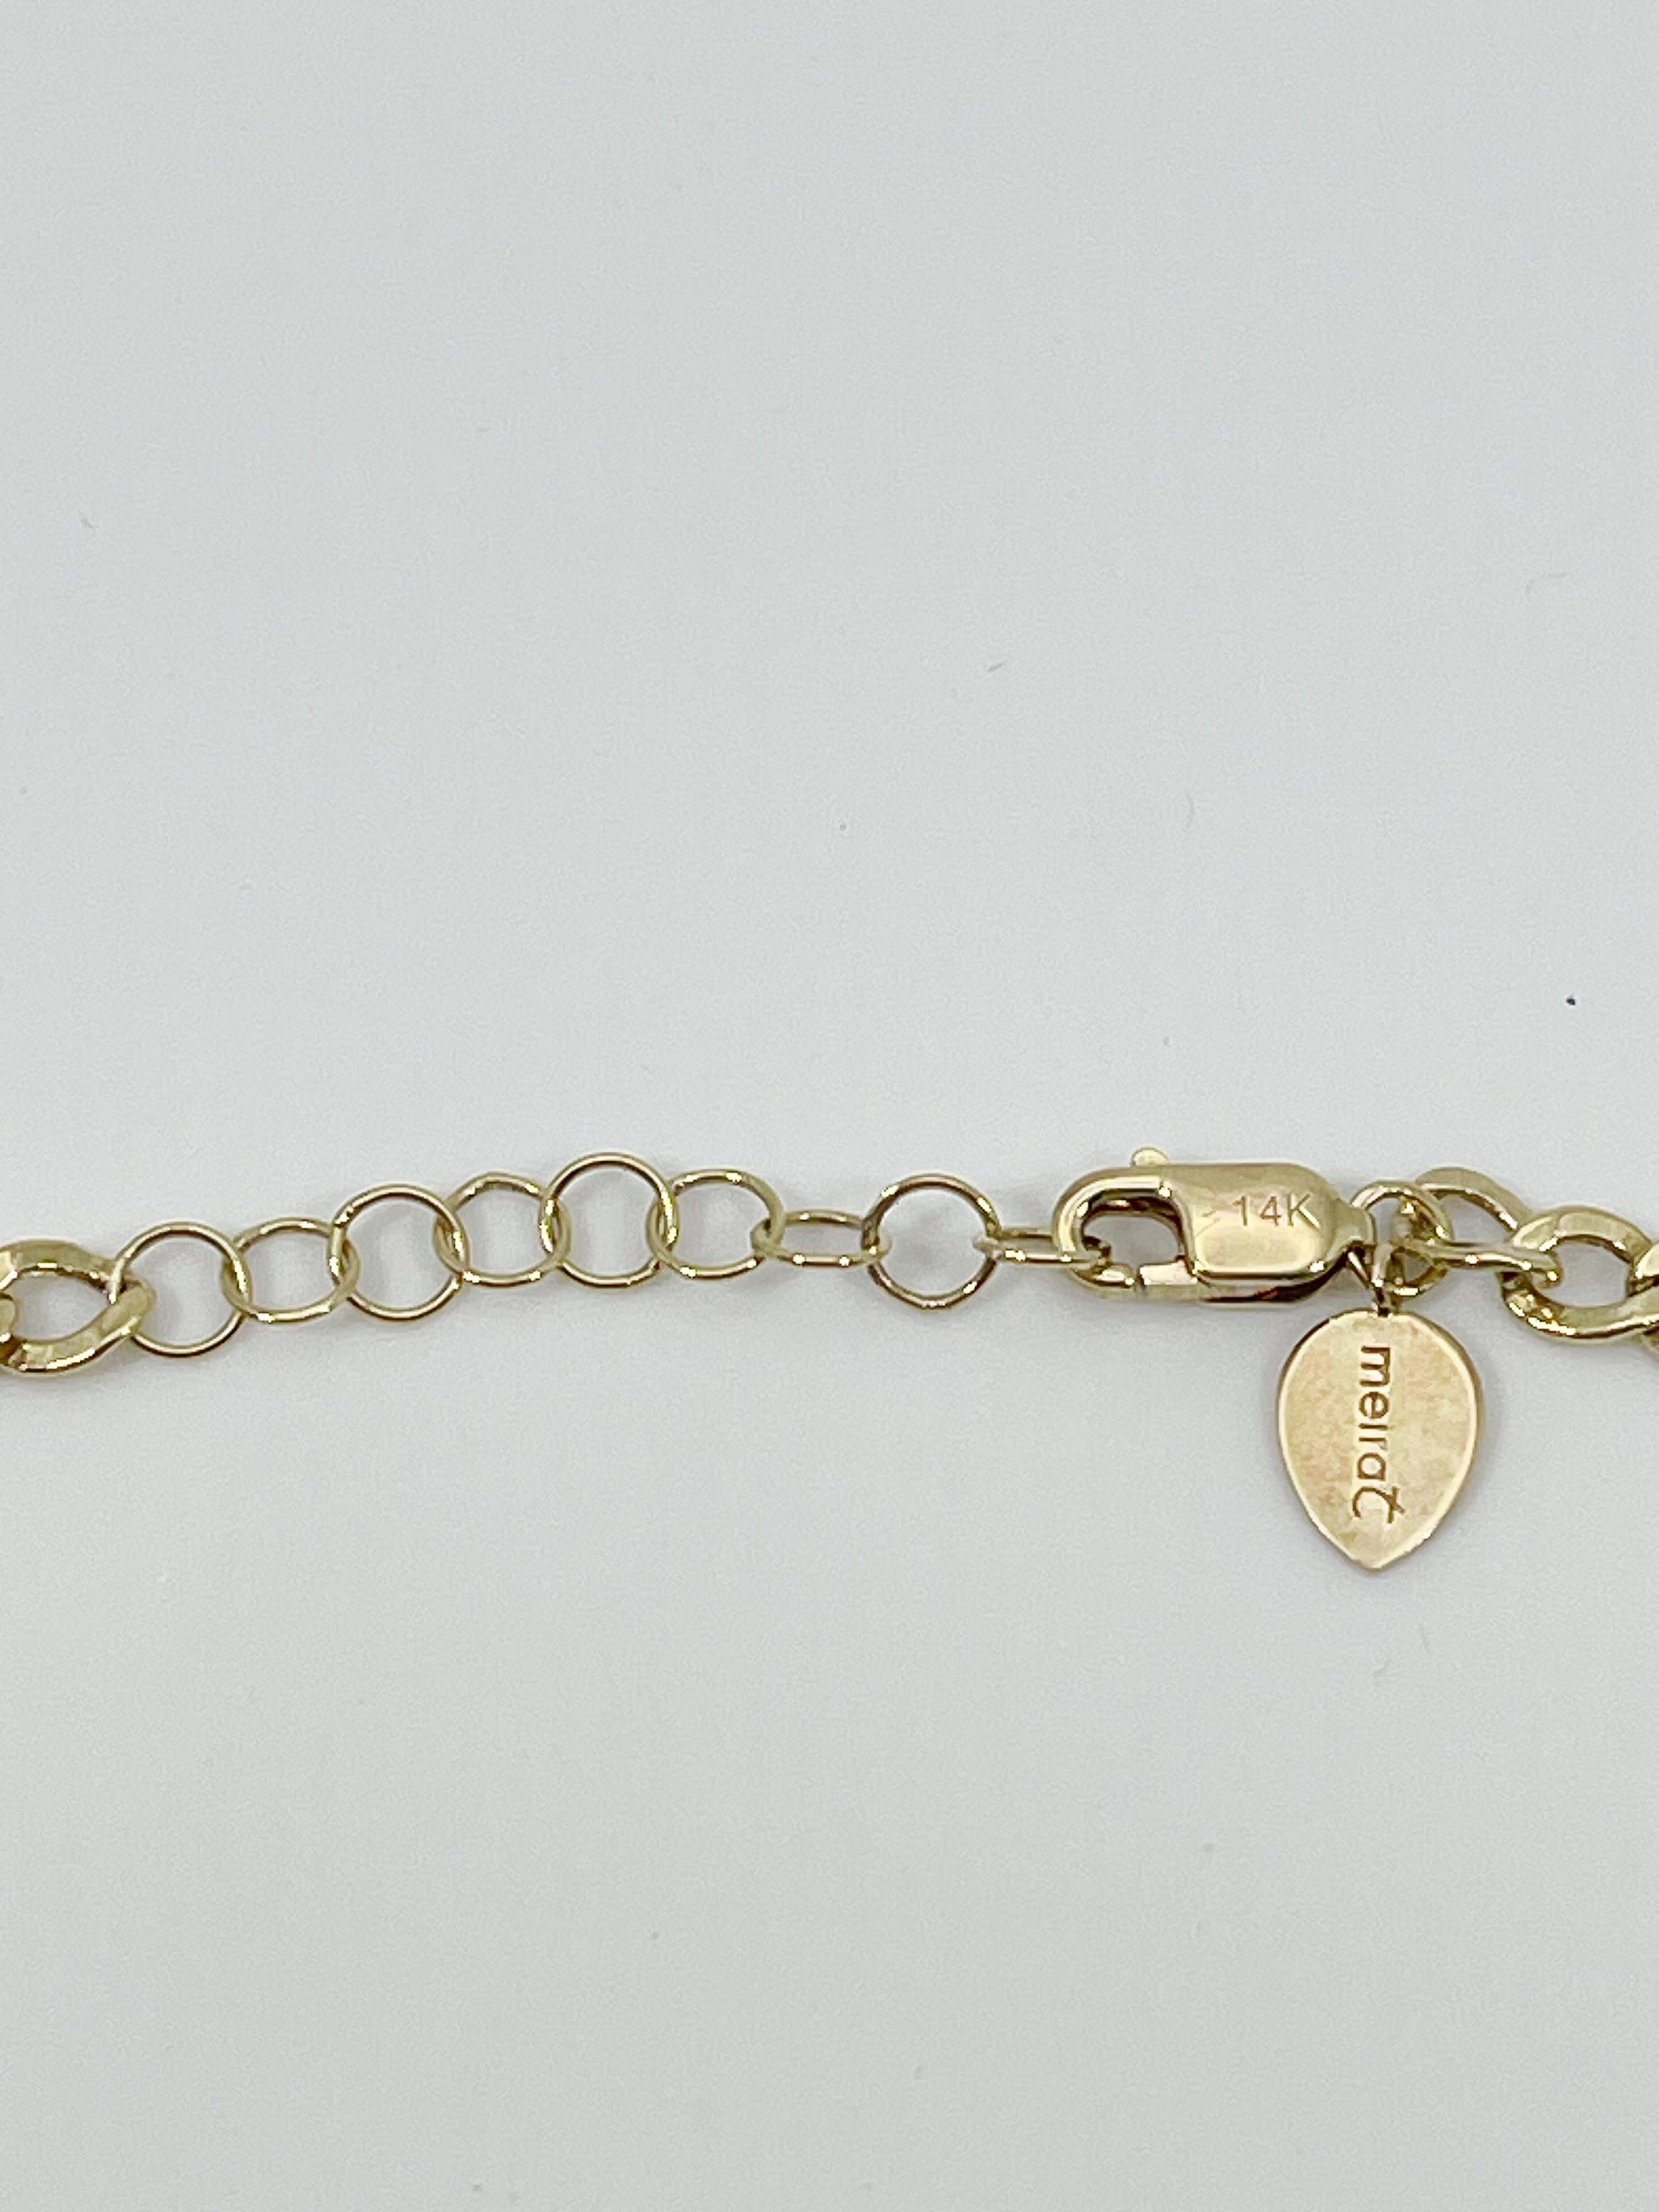 14K Yellow Gold Diamond and Sapphire Evil Eye Bracelet In Excellent Condition For Sale In Stuart, FL